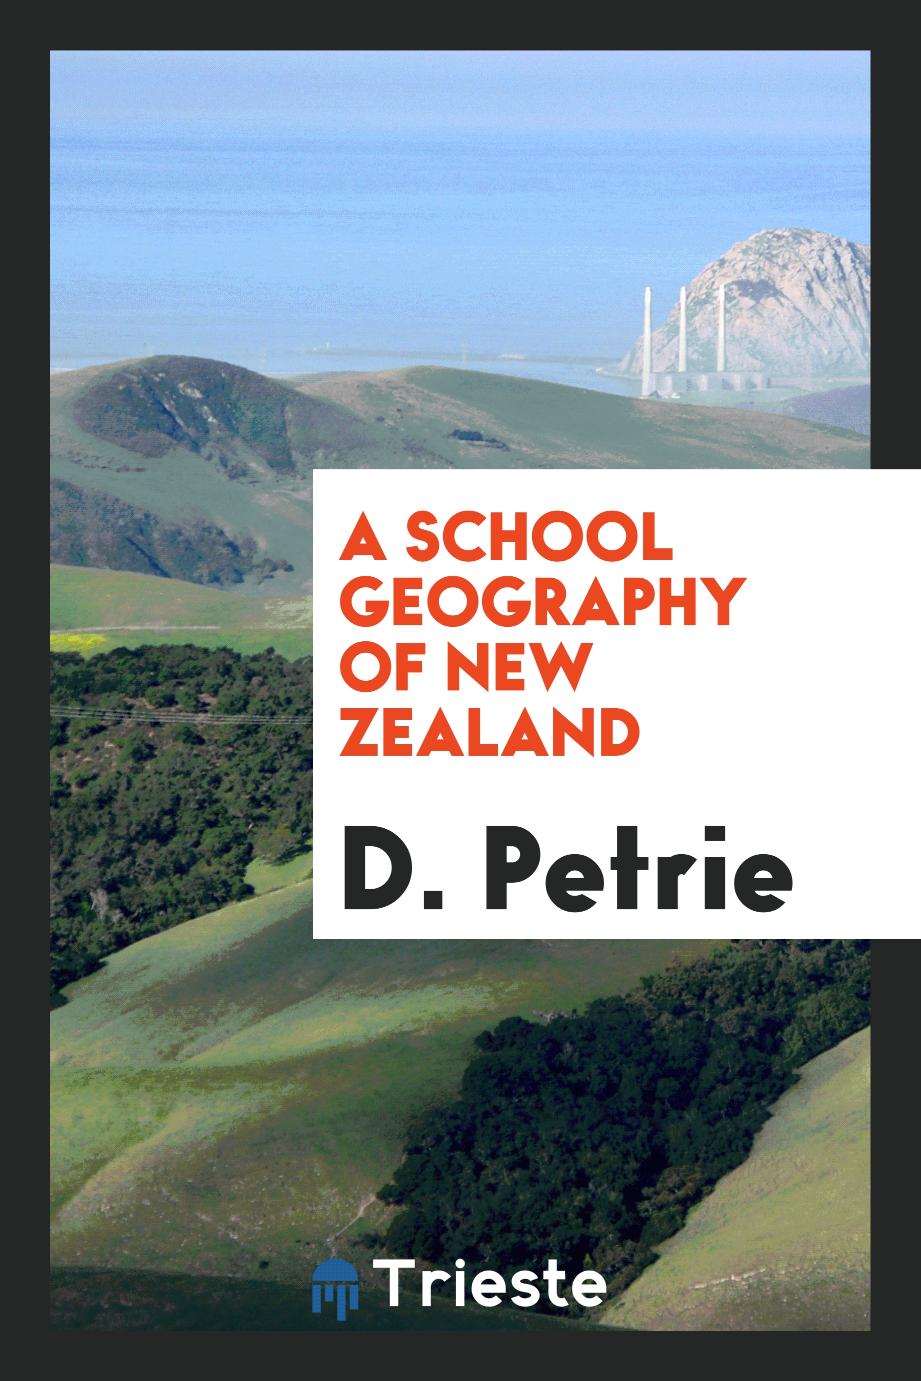 A school geography of New Zealand